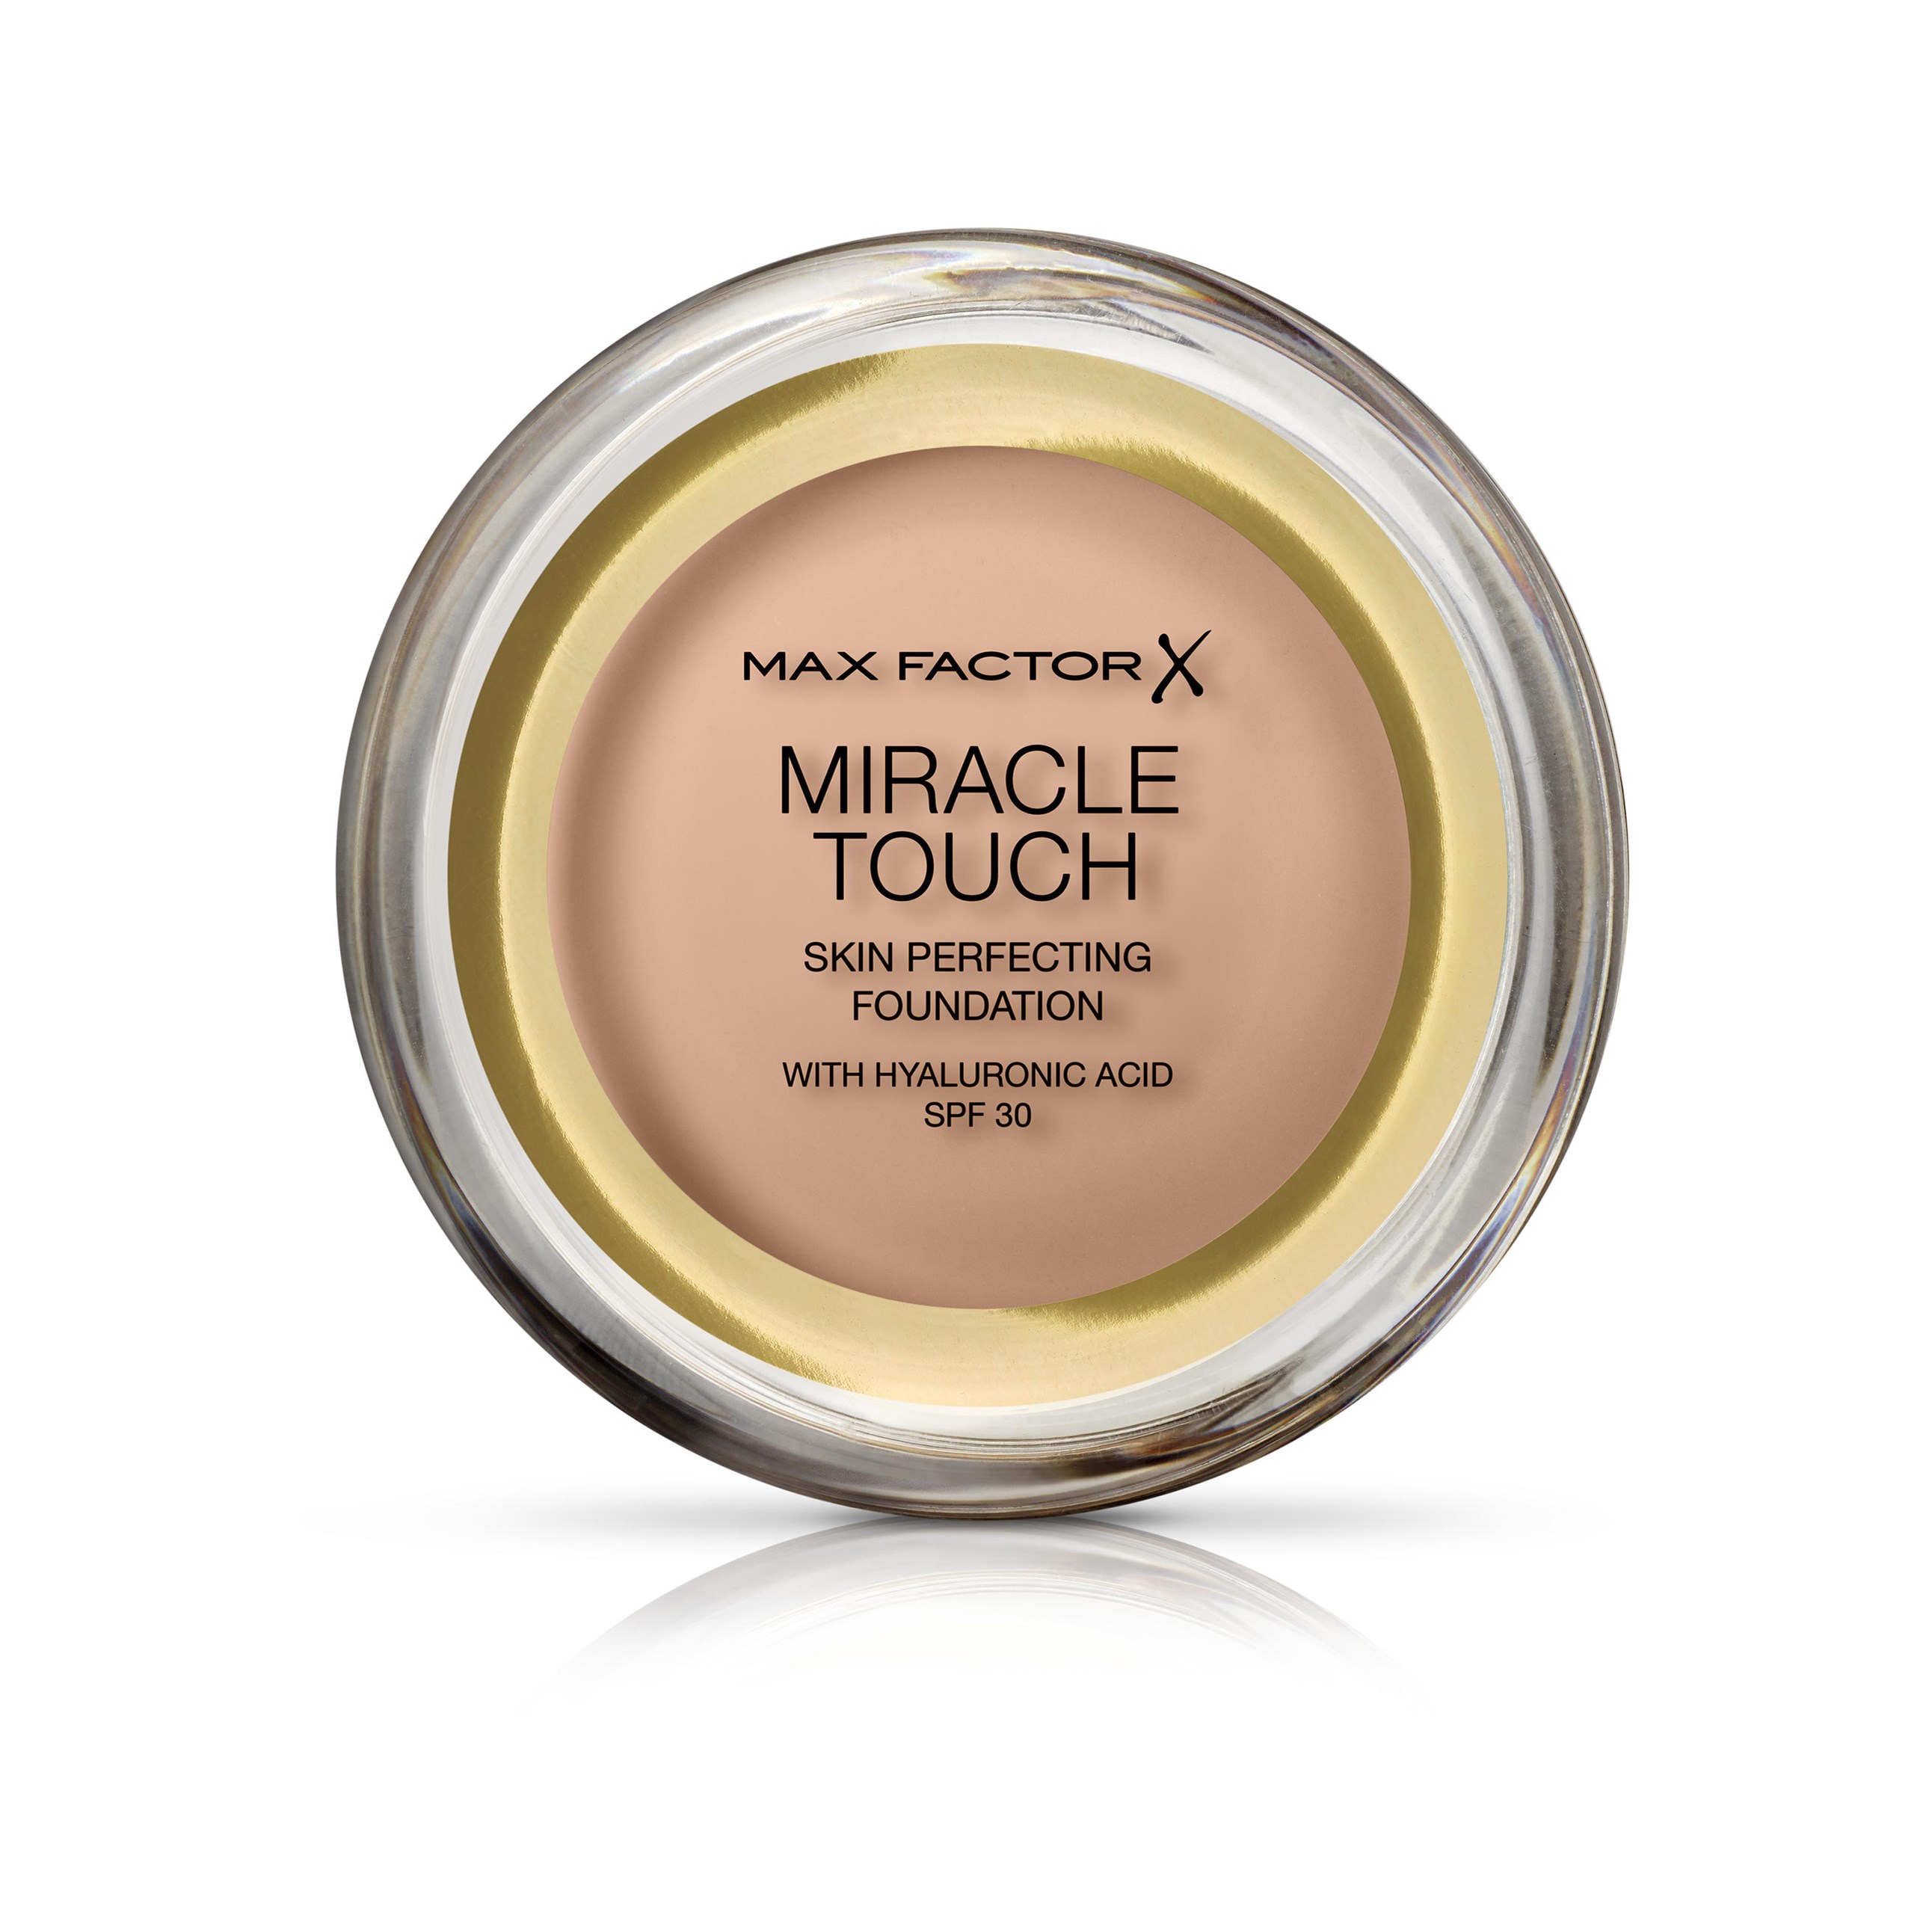 Läs mer om Max Factor Miracle Touch Foundation 45 Warm Almond